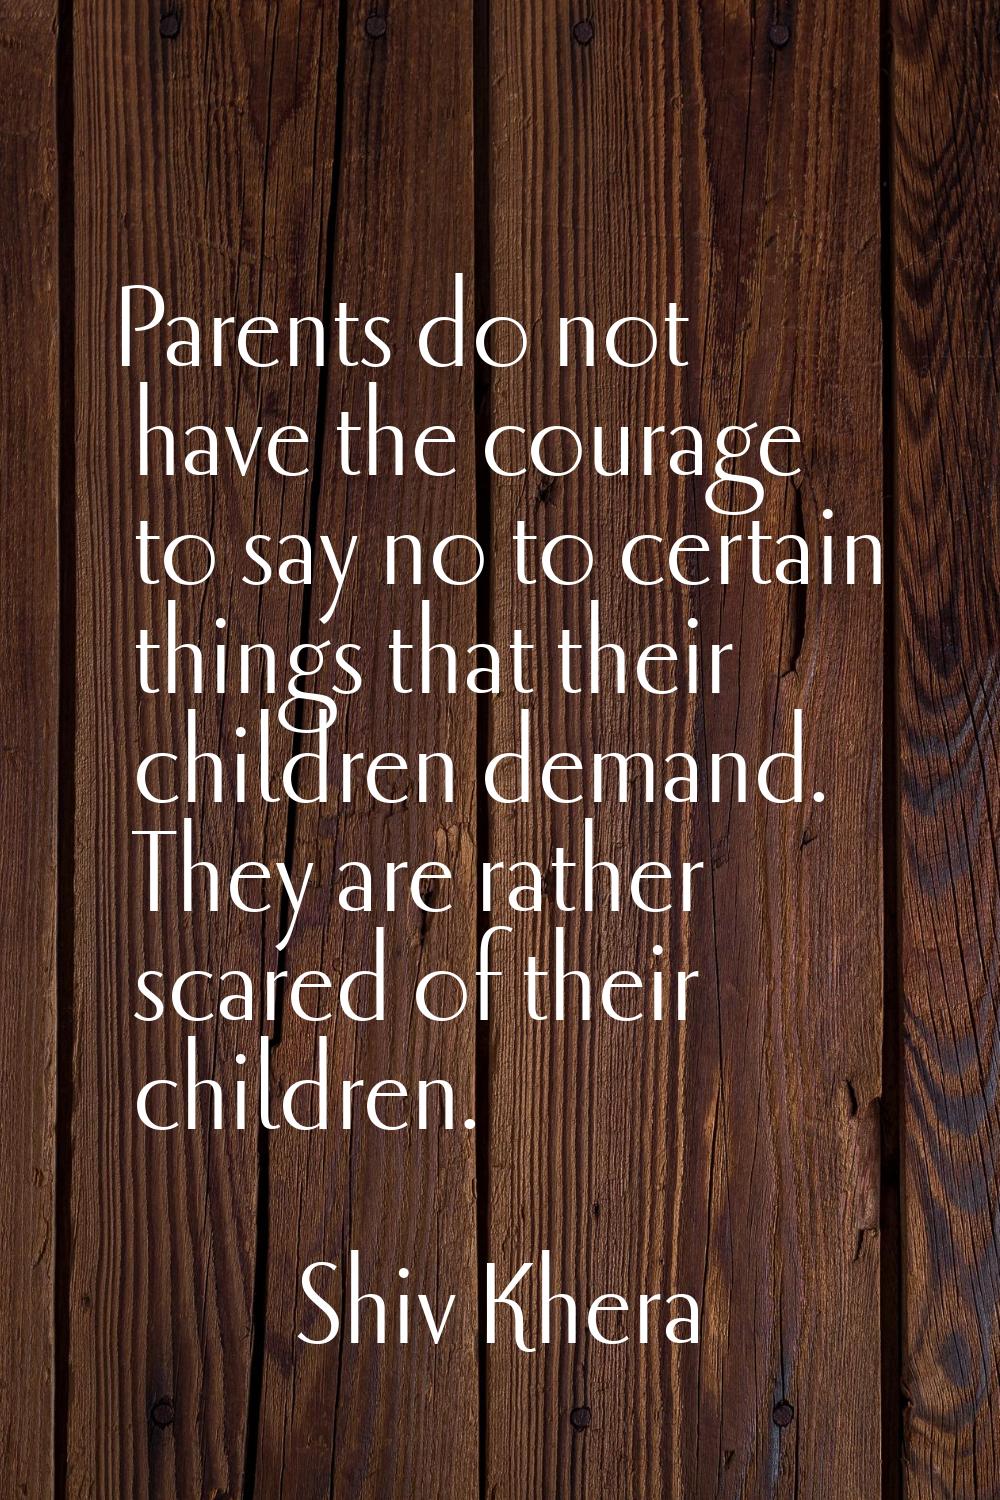 Parents do not have the courage to say no to certain things that their children demand. They are ra